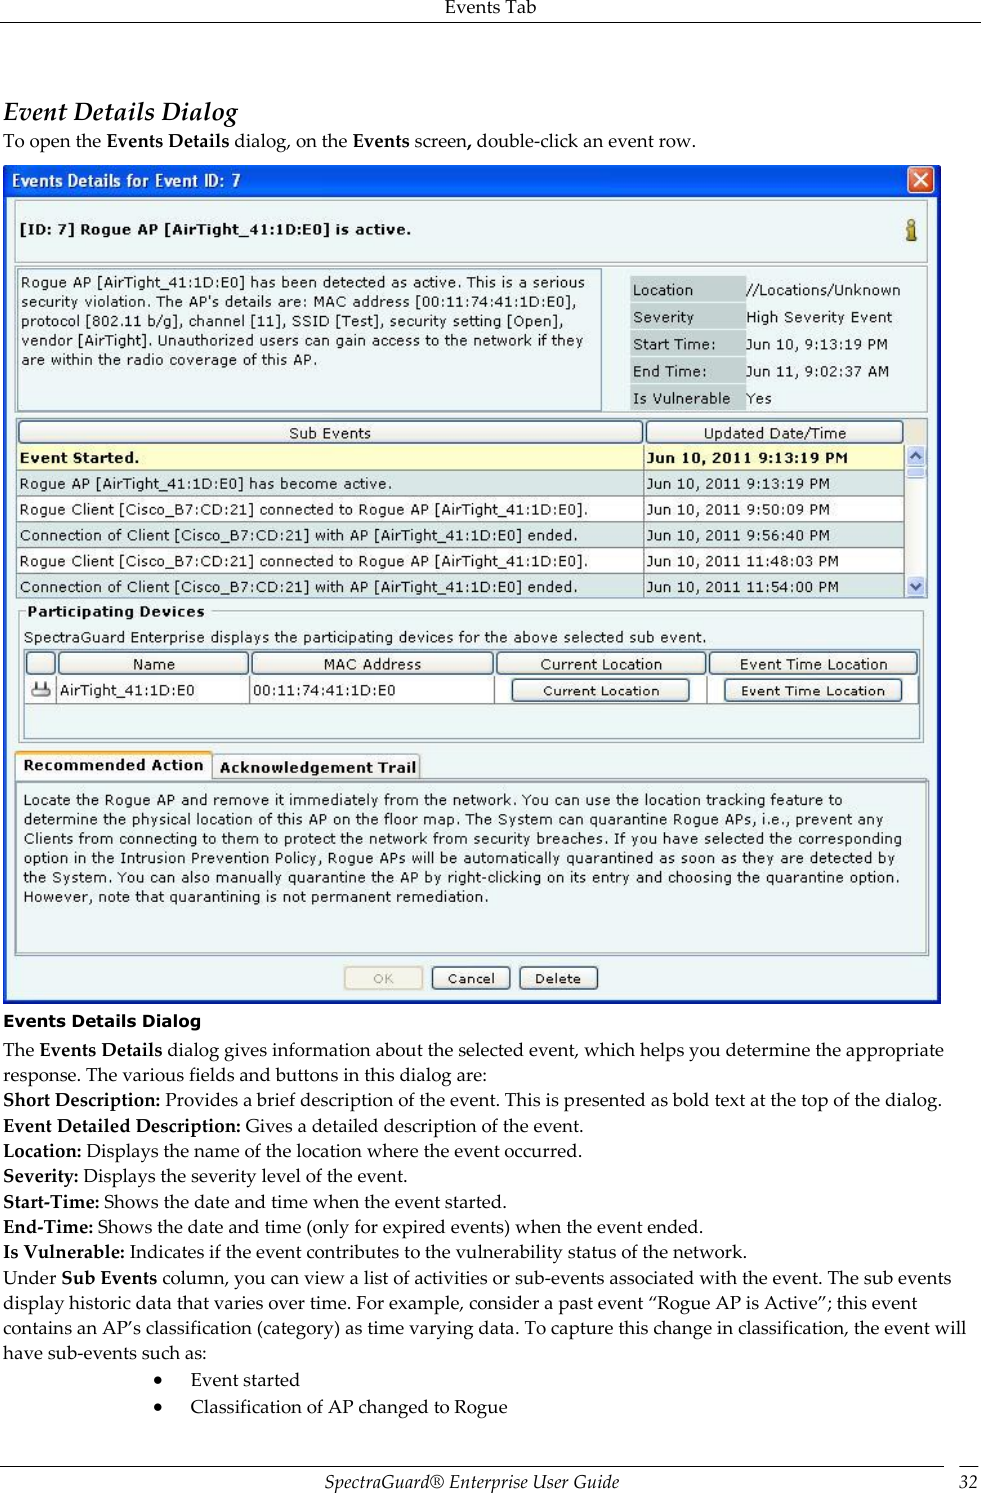 Events Tab SpectraGuard®  Enterprise User Guide 32   Event Details Dialog To open the Events Details dialog, on the Events screen, double-click an event row.  Events Details Dialog The Events Details dialog gives information about the selected event, which helps you determine the appropriate response. The various fields and buttons in this dialog are: Short Description: Provides a brief description of the event. This is presented as bold text at the top of the dialog. Event Detailed Description: Gives a detailed description of the event. Location: Displays the name of the location where the event occurred. Severity: Displays the severity level of the event. Start-Time: Shows the date and time when the event started. End-Time: Shows the date and time (only for expired events) when the event ended. Is Vulnerable: Indicates if the event contributes to the vulnerability status of the network. Under Sub Events column, you can view a list of activities or sub-events associated with the event. The sub events display historic data that varies over time. For example, consider a past event “Rogue AP is Active”; this event contains an AP’s classification (category) as time varying data. To capture this change in classification, the event will have sub-events such as:  Event started  Classification of AP changed to Rogue 